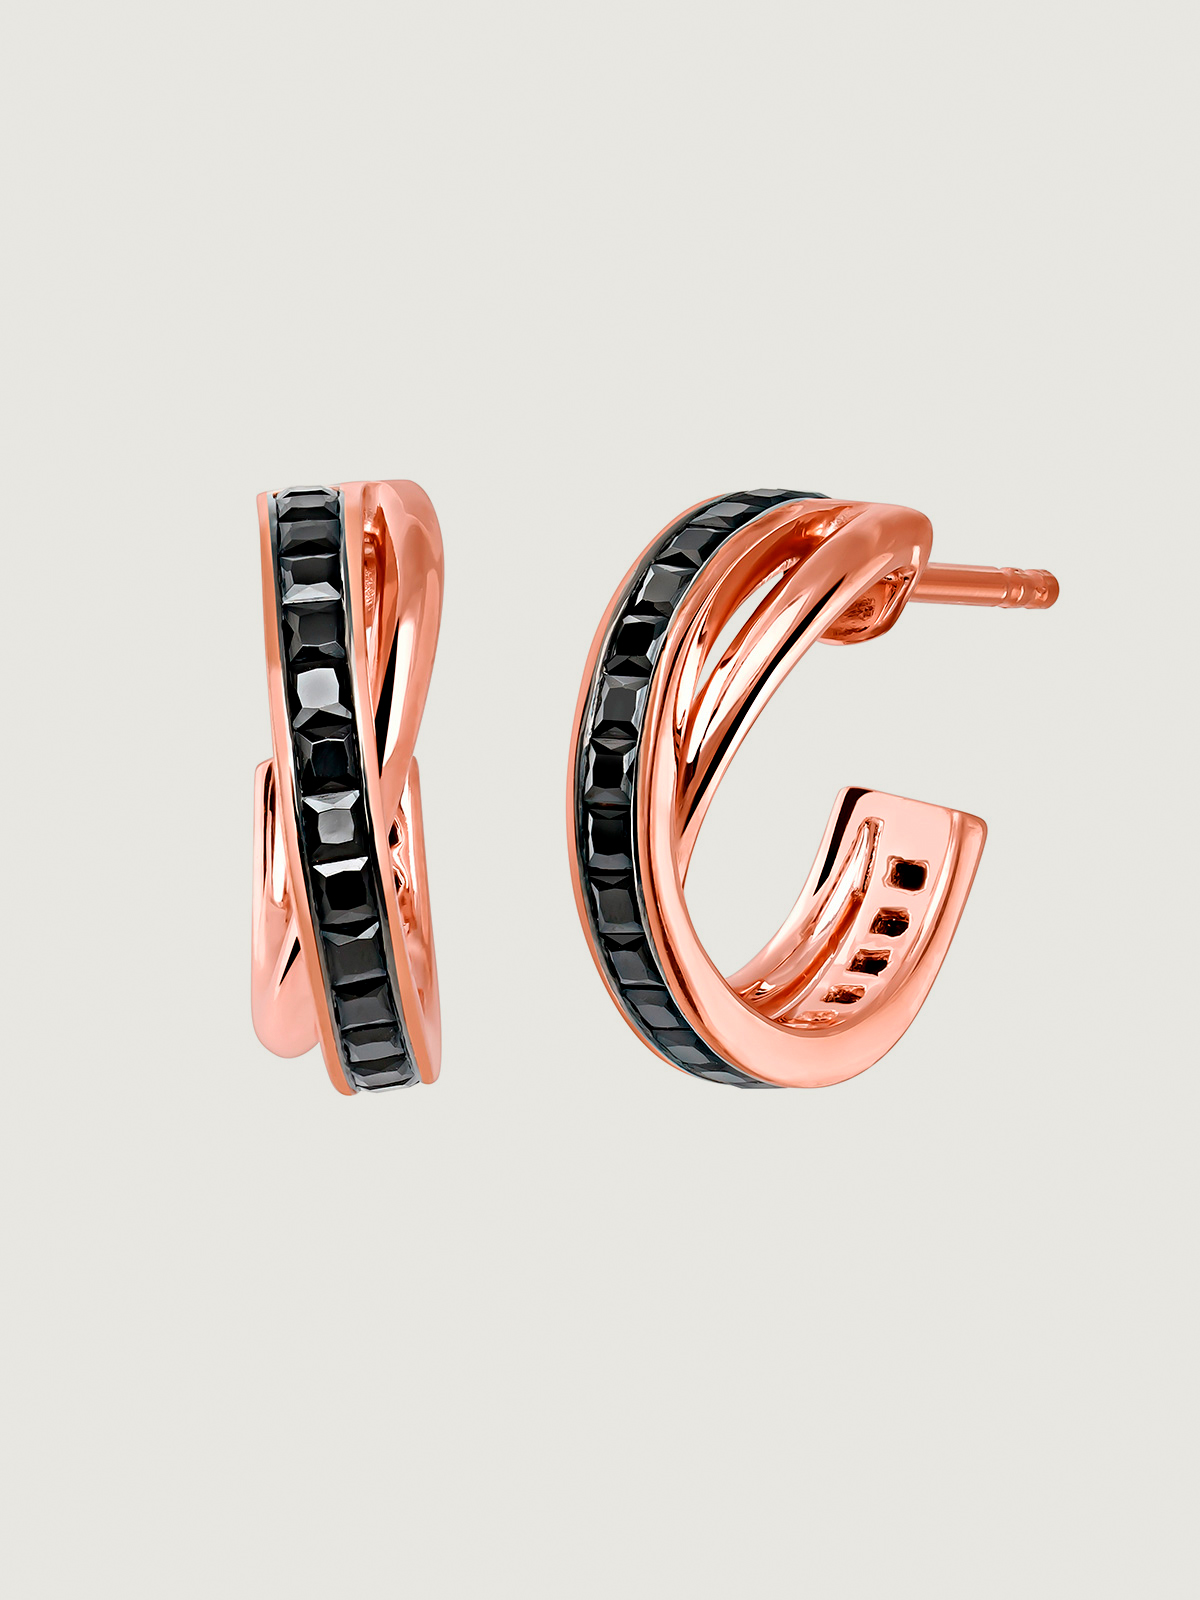 Double hoop earrings made of 925 silver bathed in 18K rose gold with black spinels.